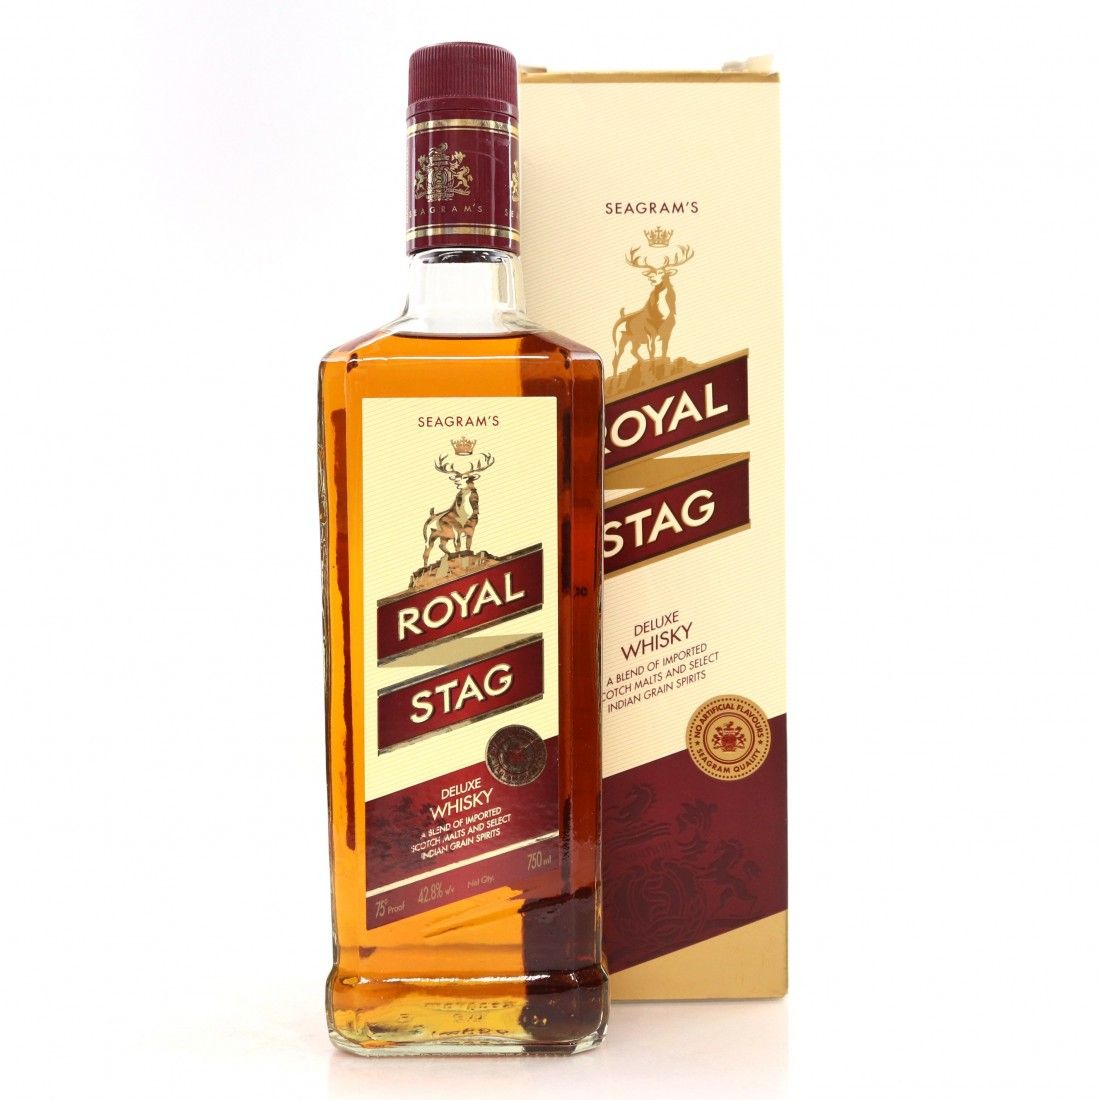 Seagram's Royal Stag 75cl